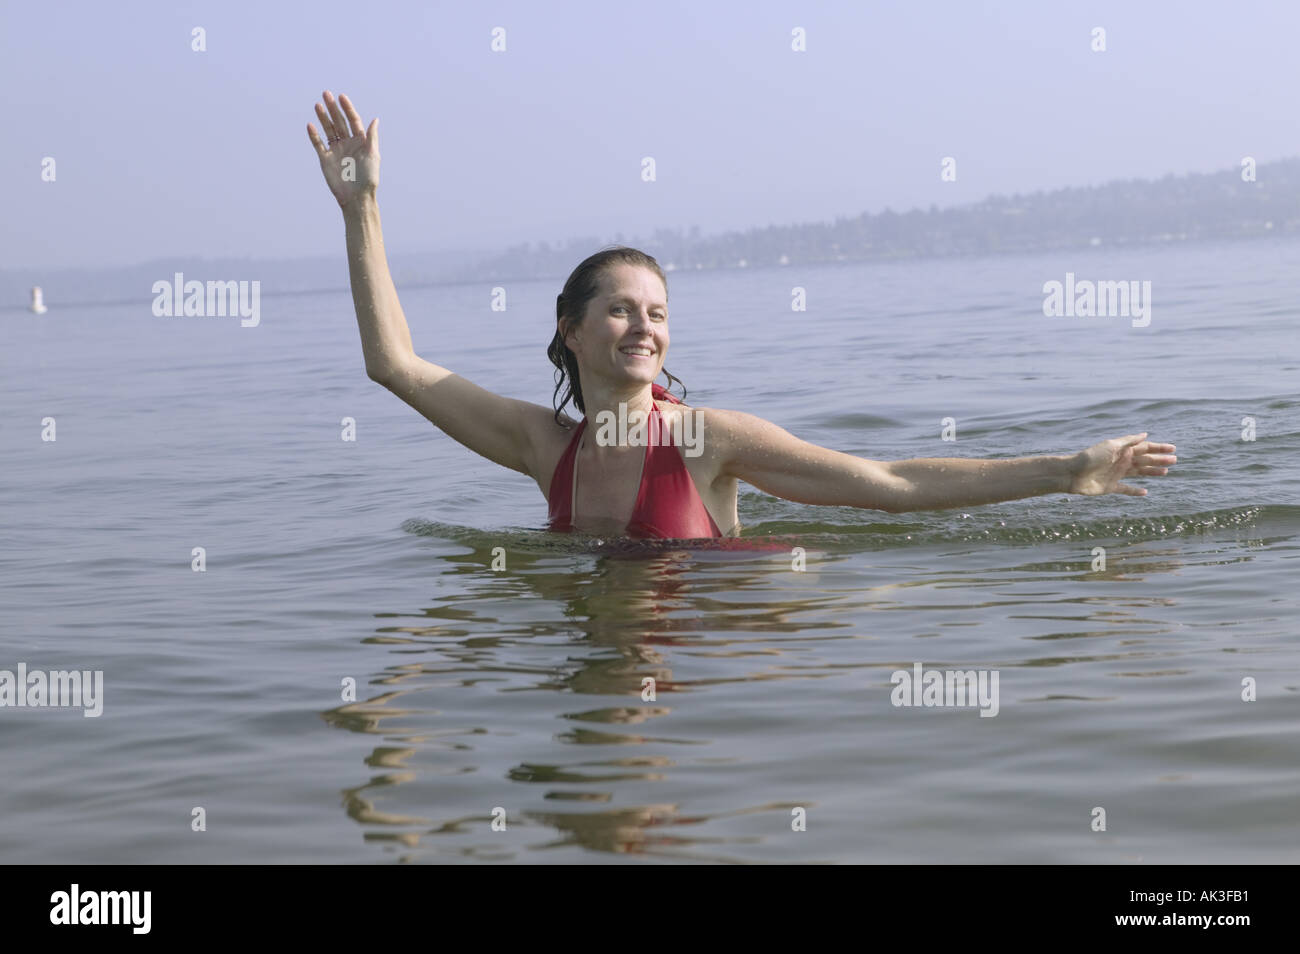 A woman swimming and posing in a lake Stock Photo